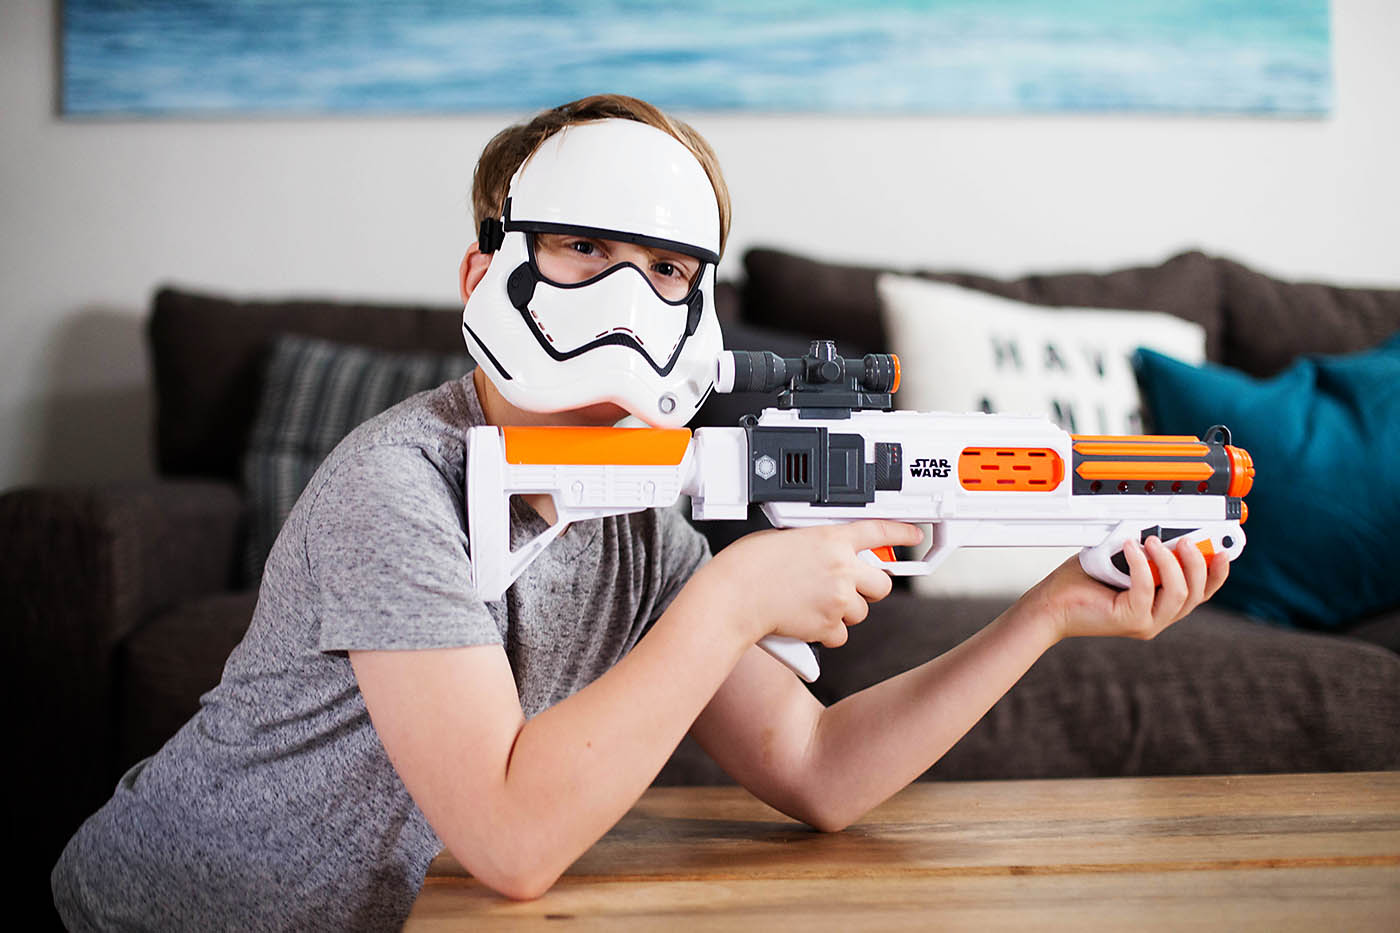 DIY droid targets inspired by Star Wars: The Force Awakens